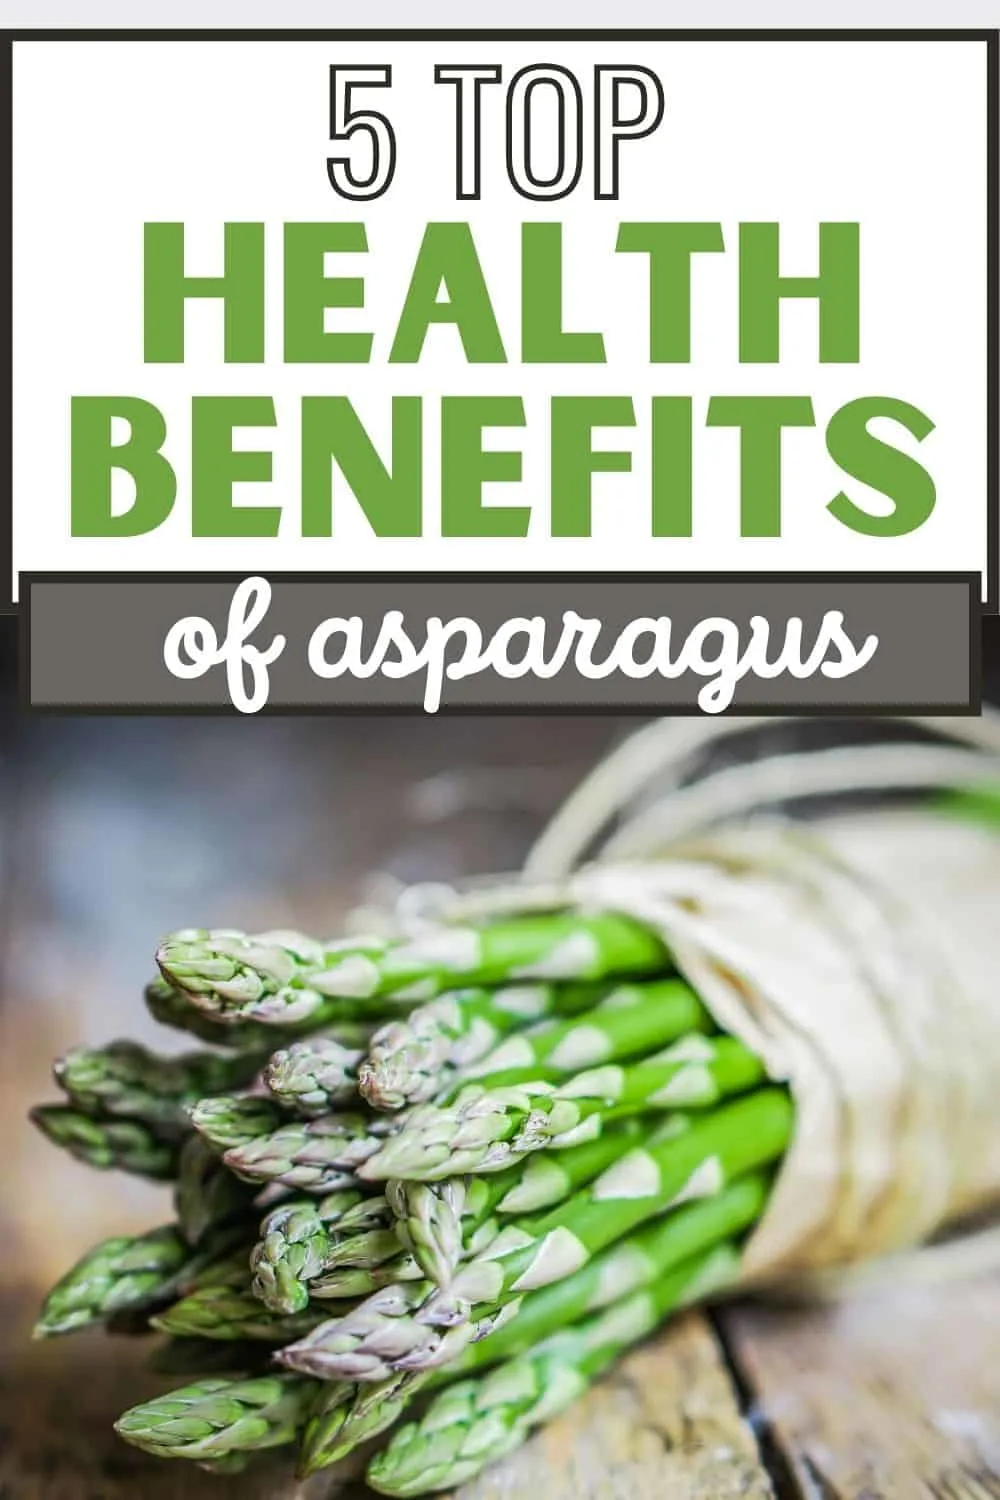 5 top health benefits of asparagus